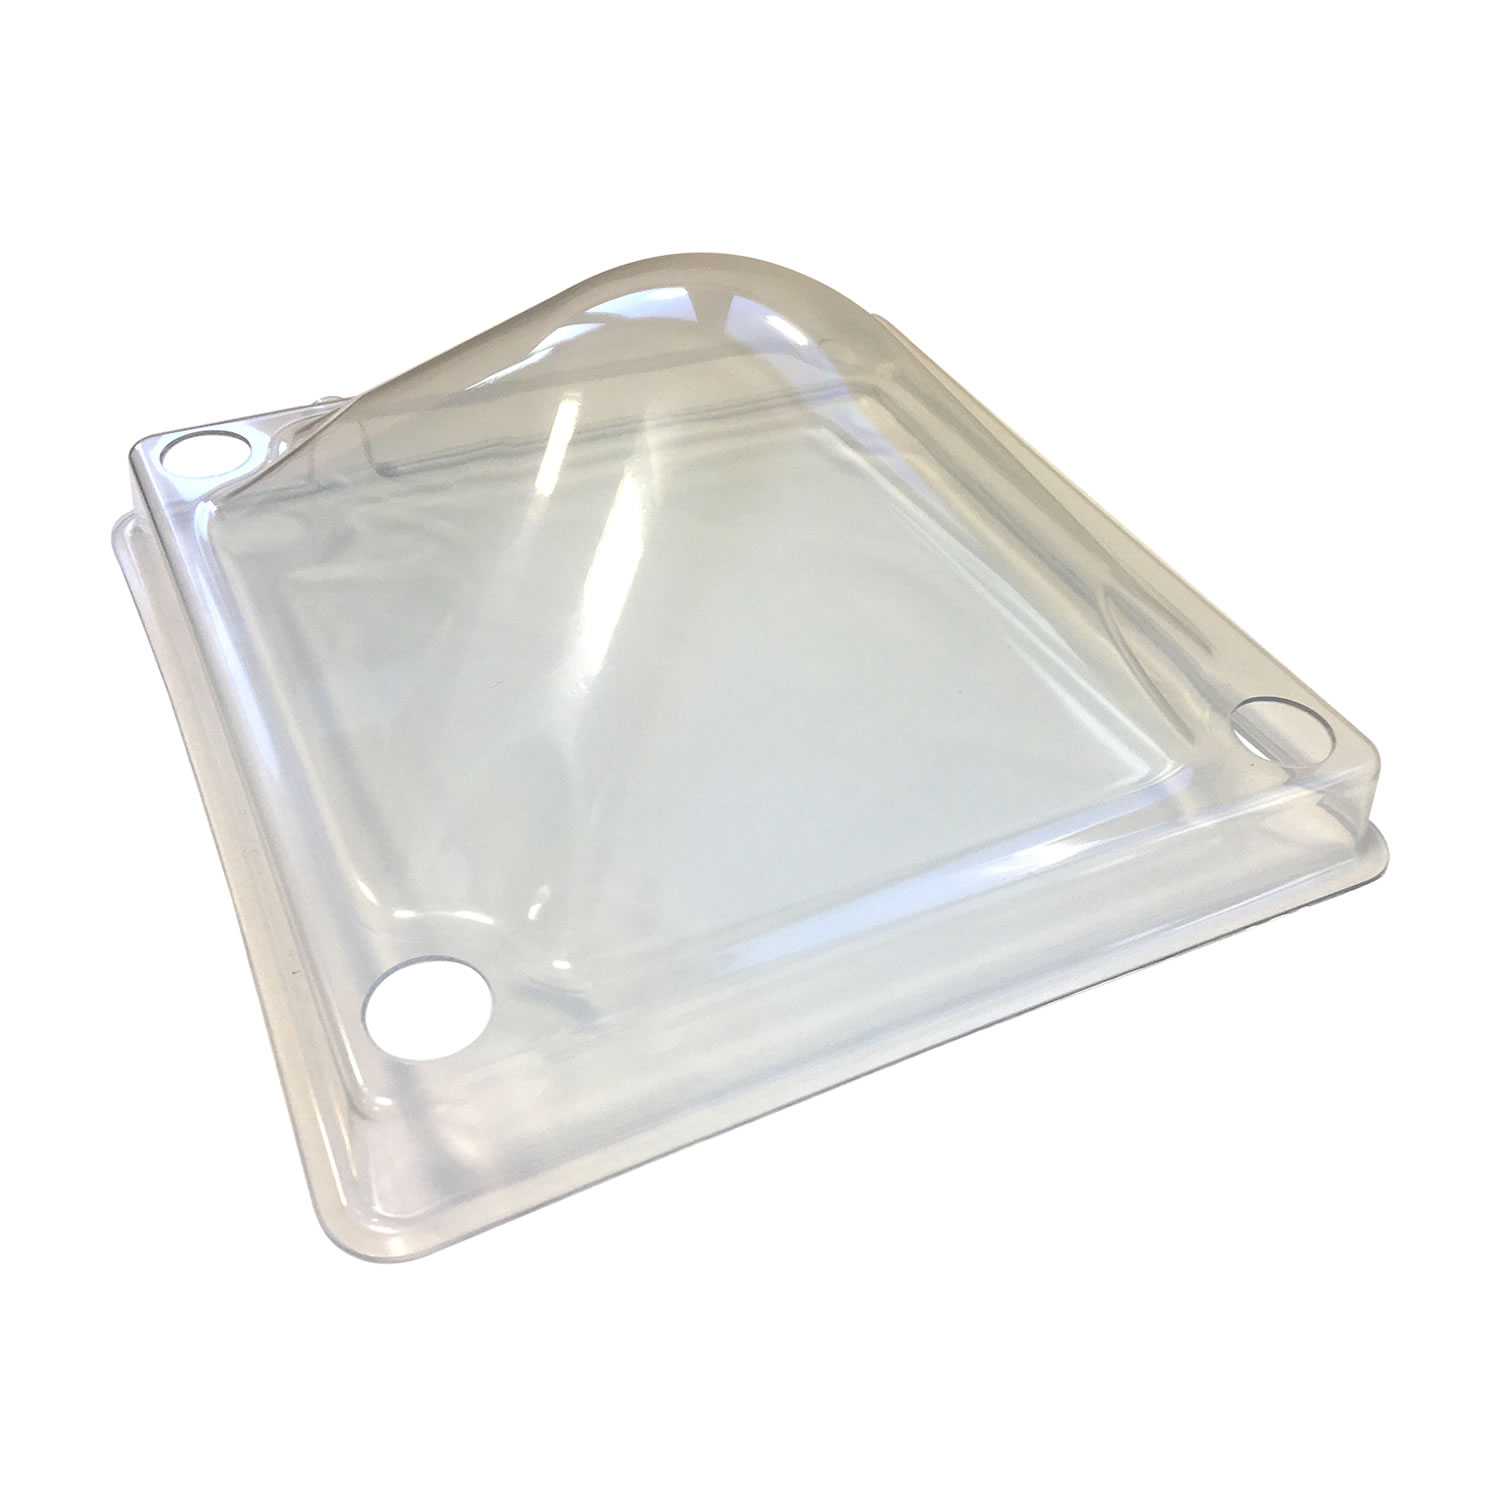 CHICKTEC COMFORT CLEAR PLASTIC DOME COVER 50 CM  CLEAR